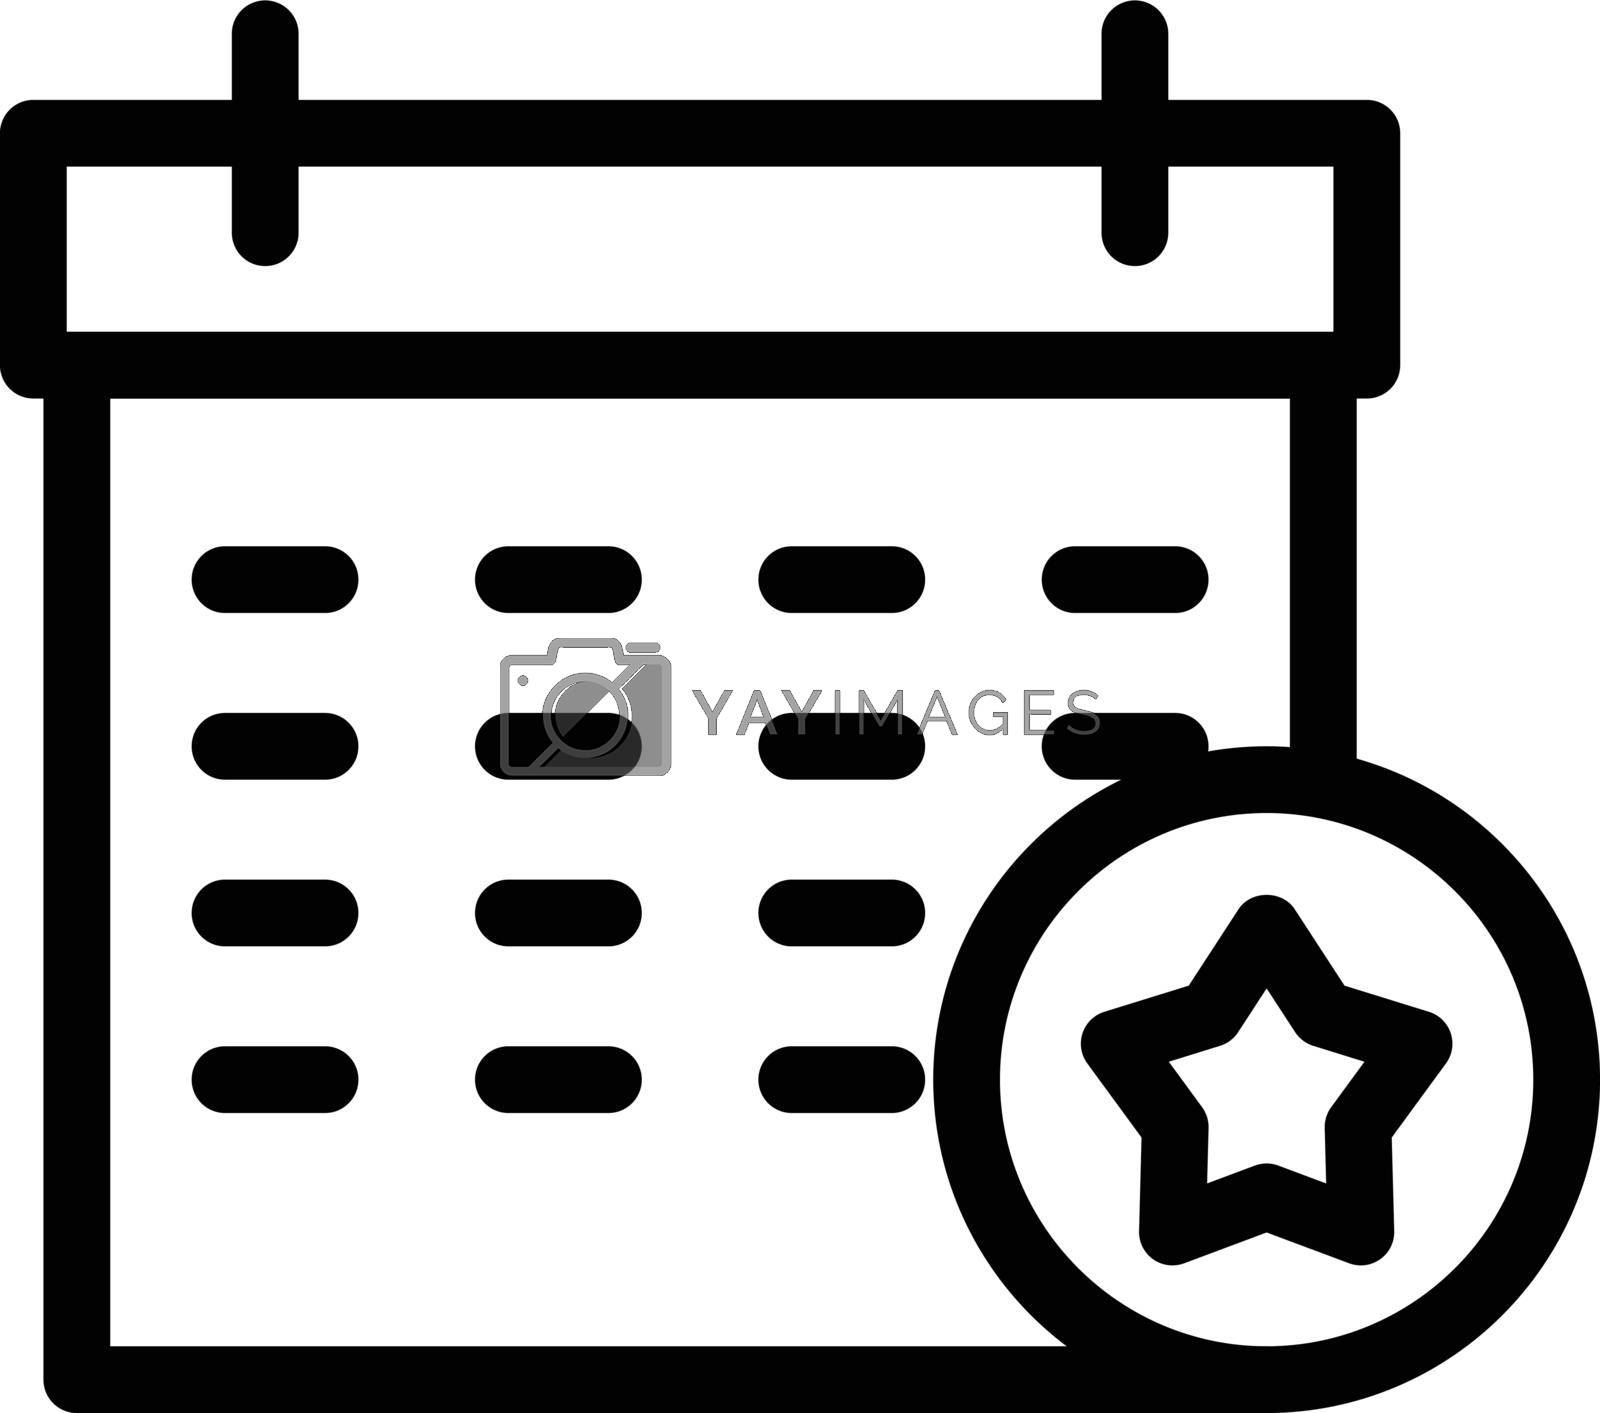 Royalty free image of calendar  by vectorstall